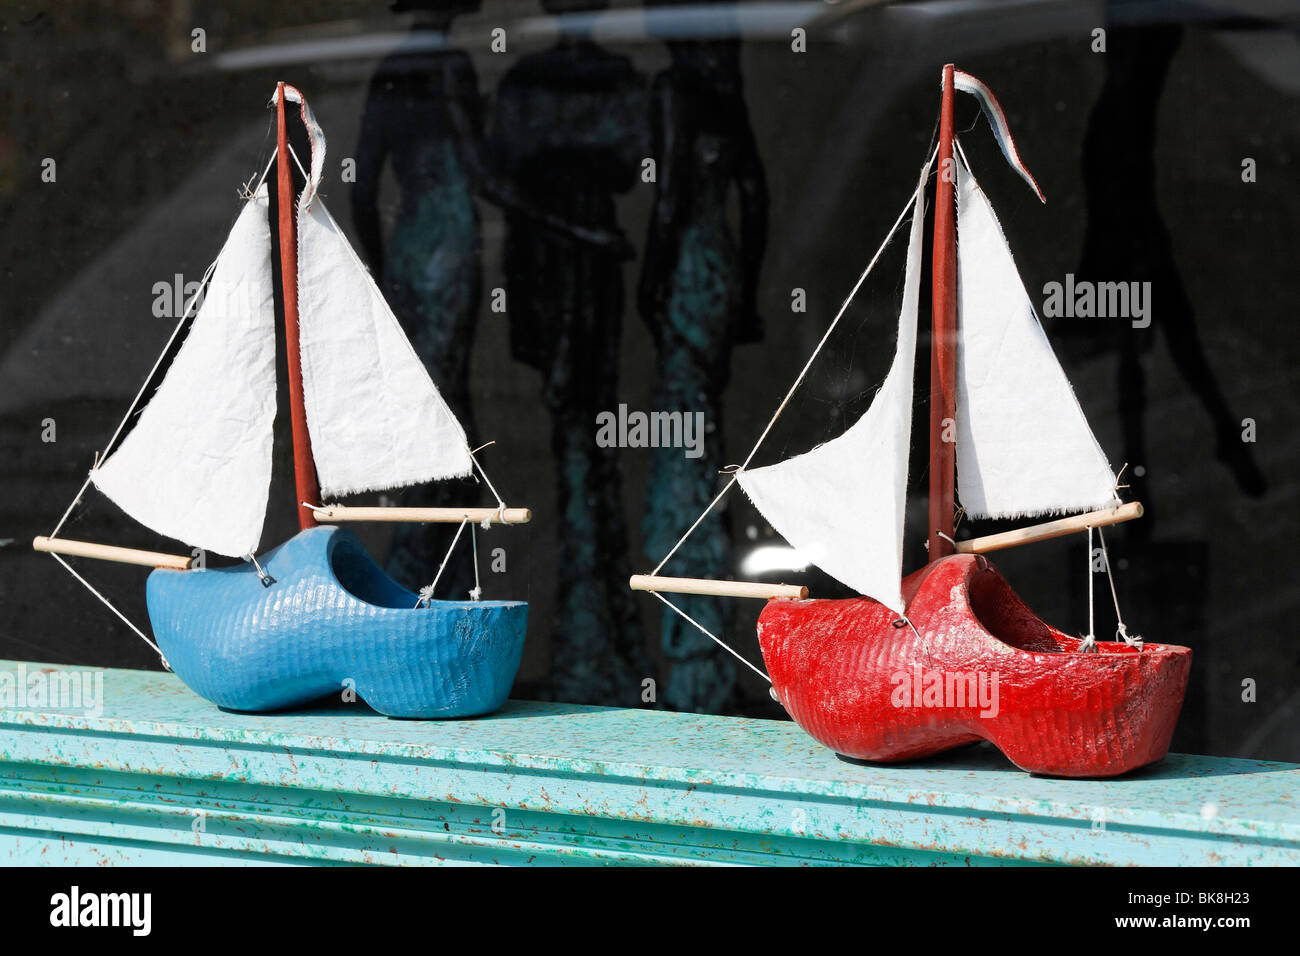 Two small sailboats in the display window, made of Dutch clogs, lettering 'Klompen', Dutch for 'clogs', handicrafted, De Rijp n Stock Photo